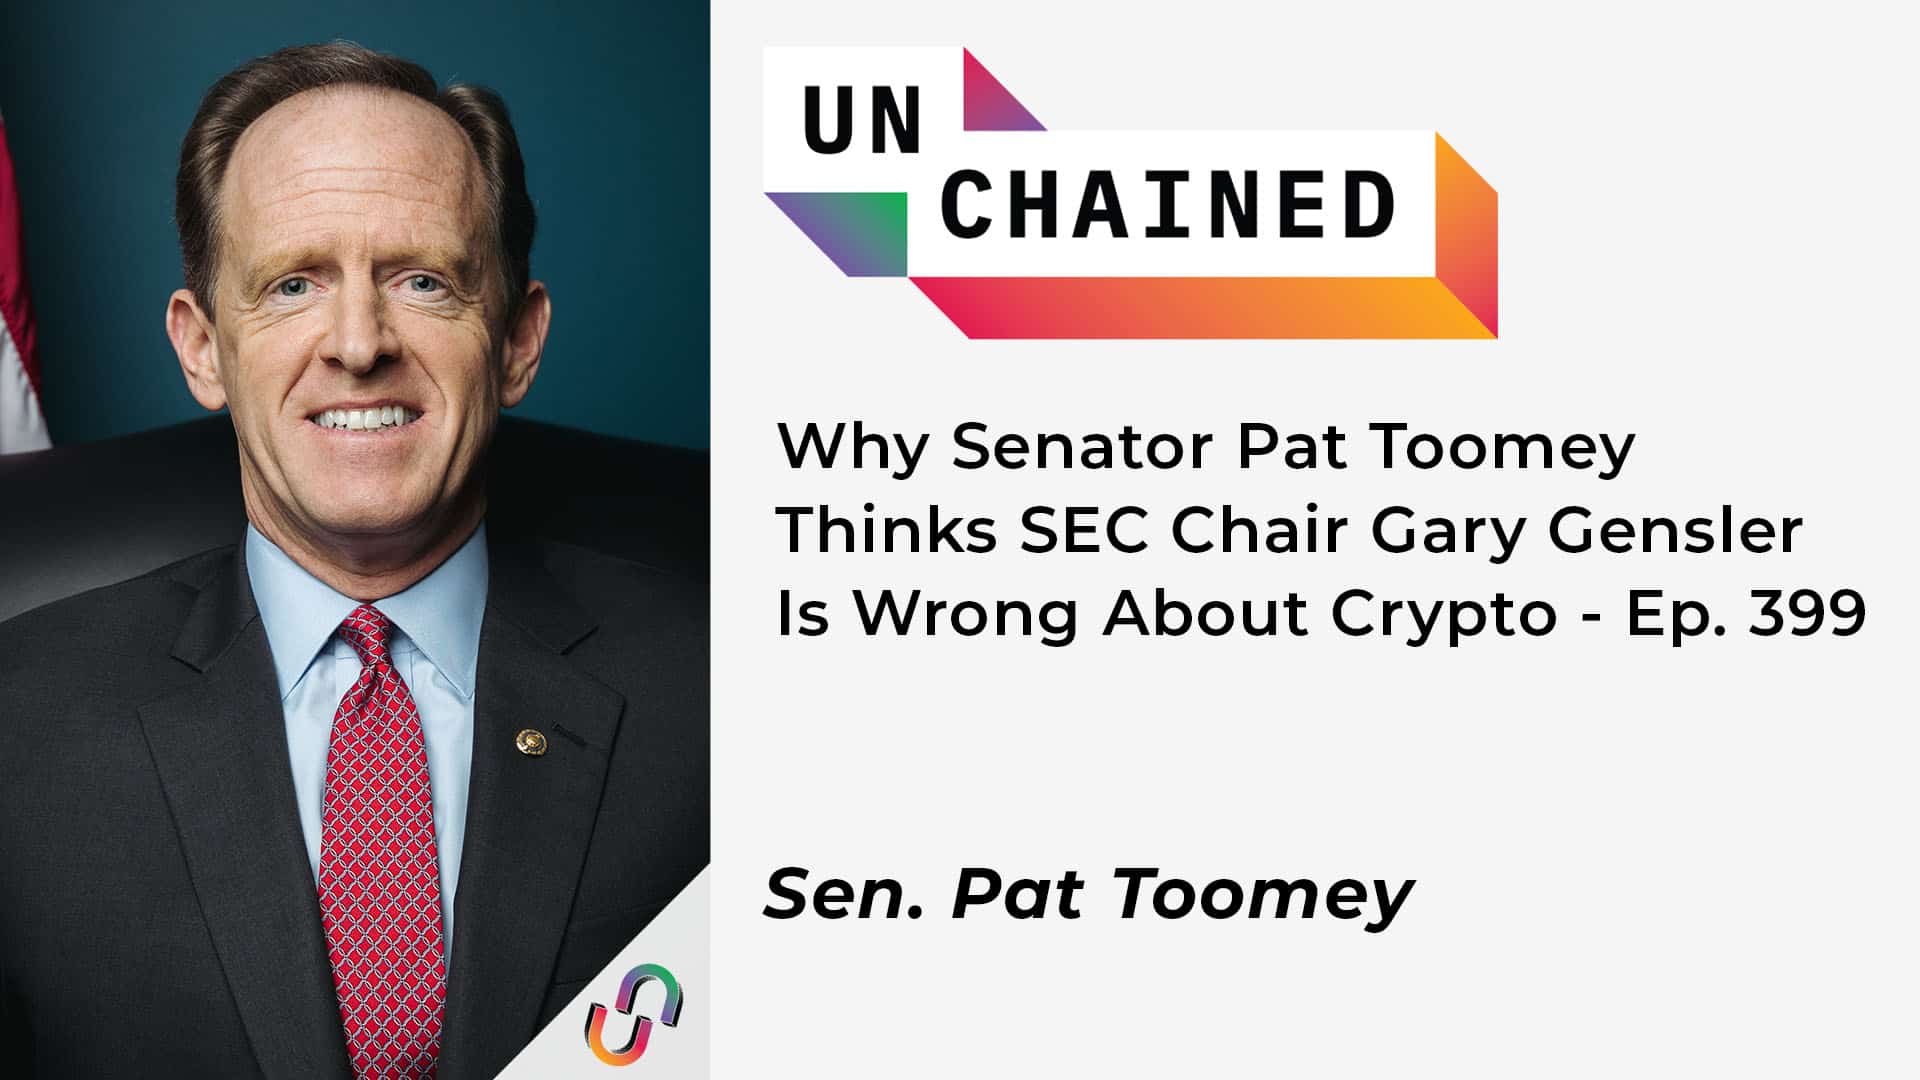 Why Senator Pat Toomey Thinks SEC Chair Gary Gensler Is Wrong About Crypto - Ep. 399